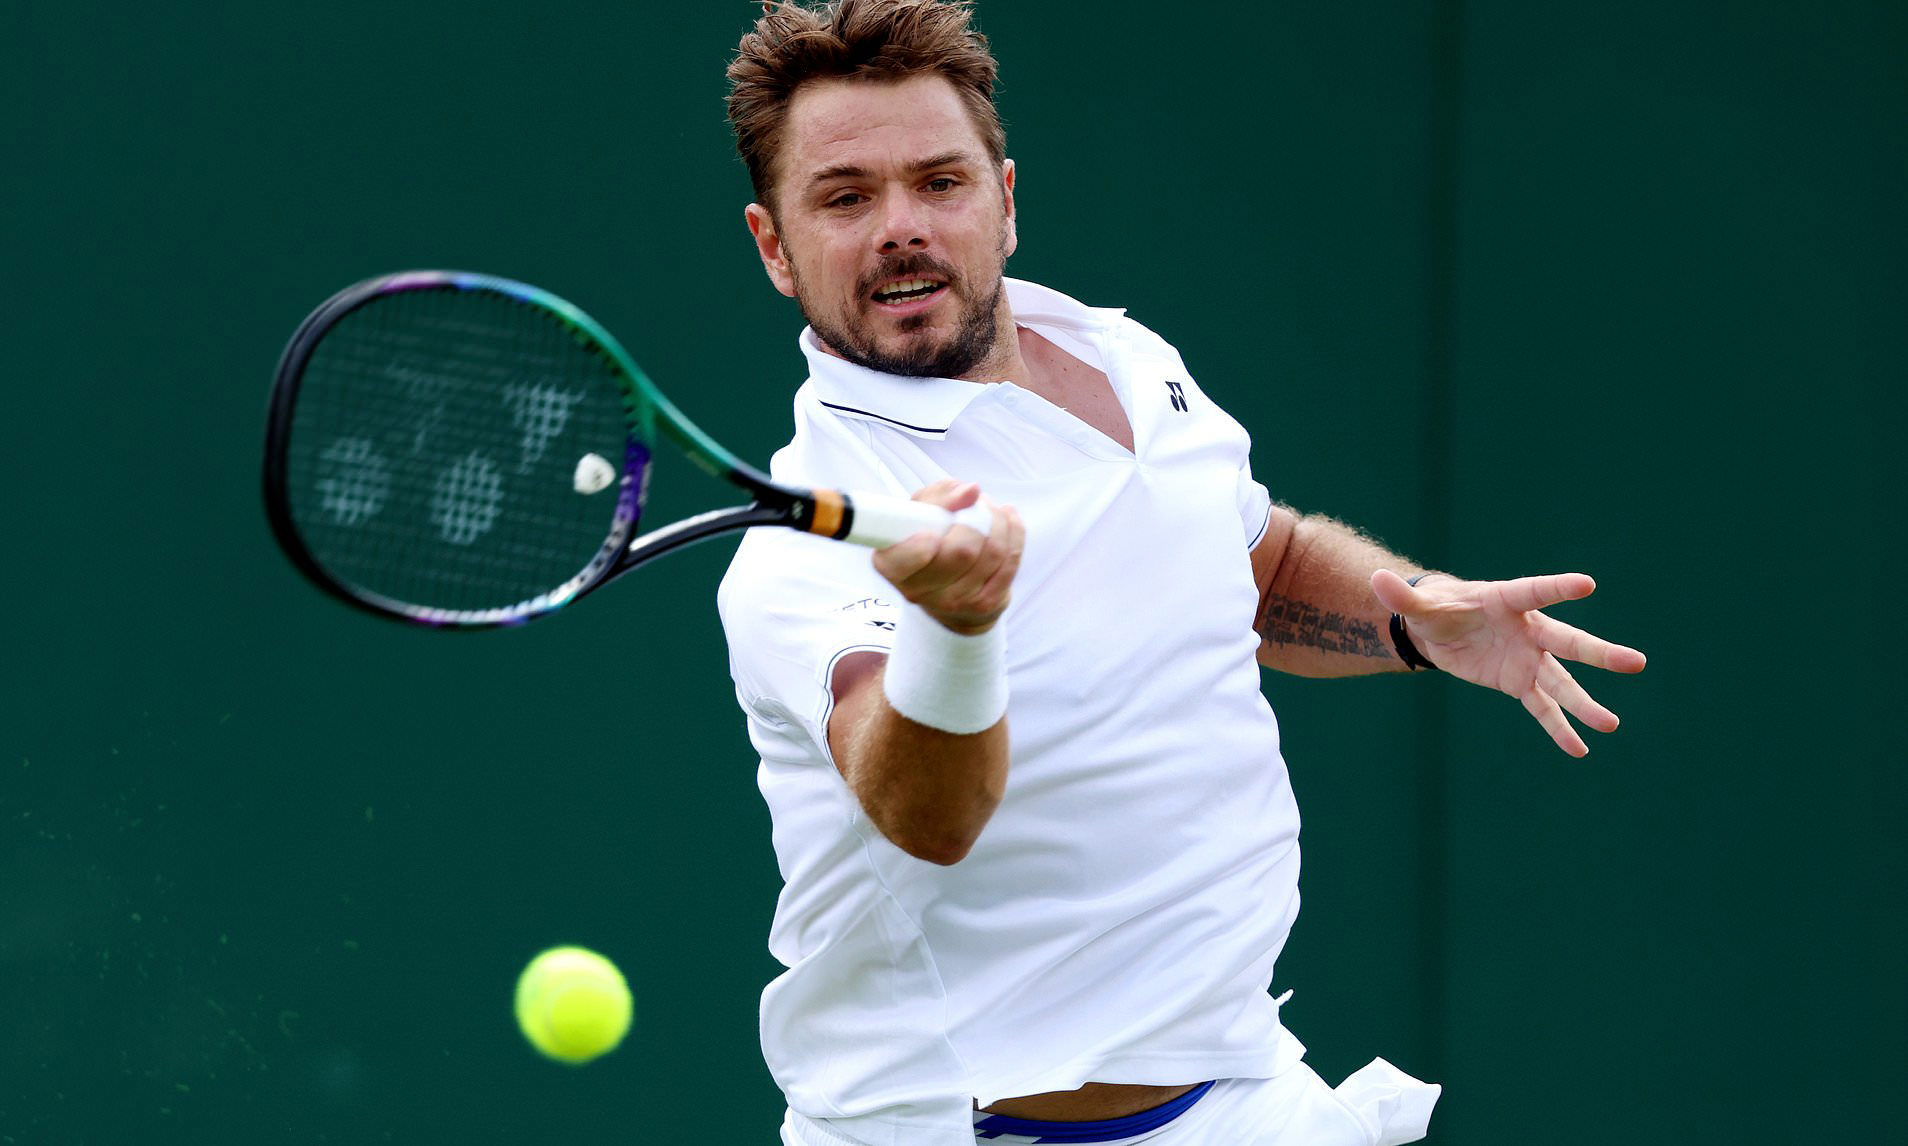 Stan Wawrinka Continues To Search For Tennis Highs At 38 Years Old